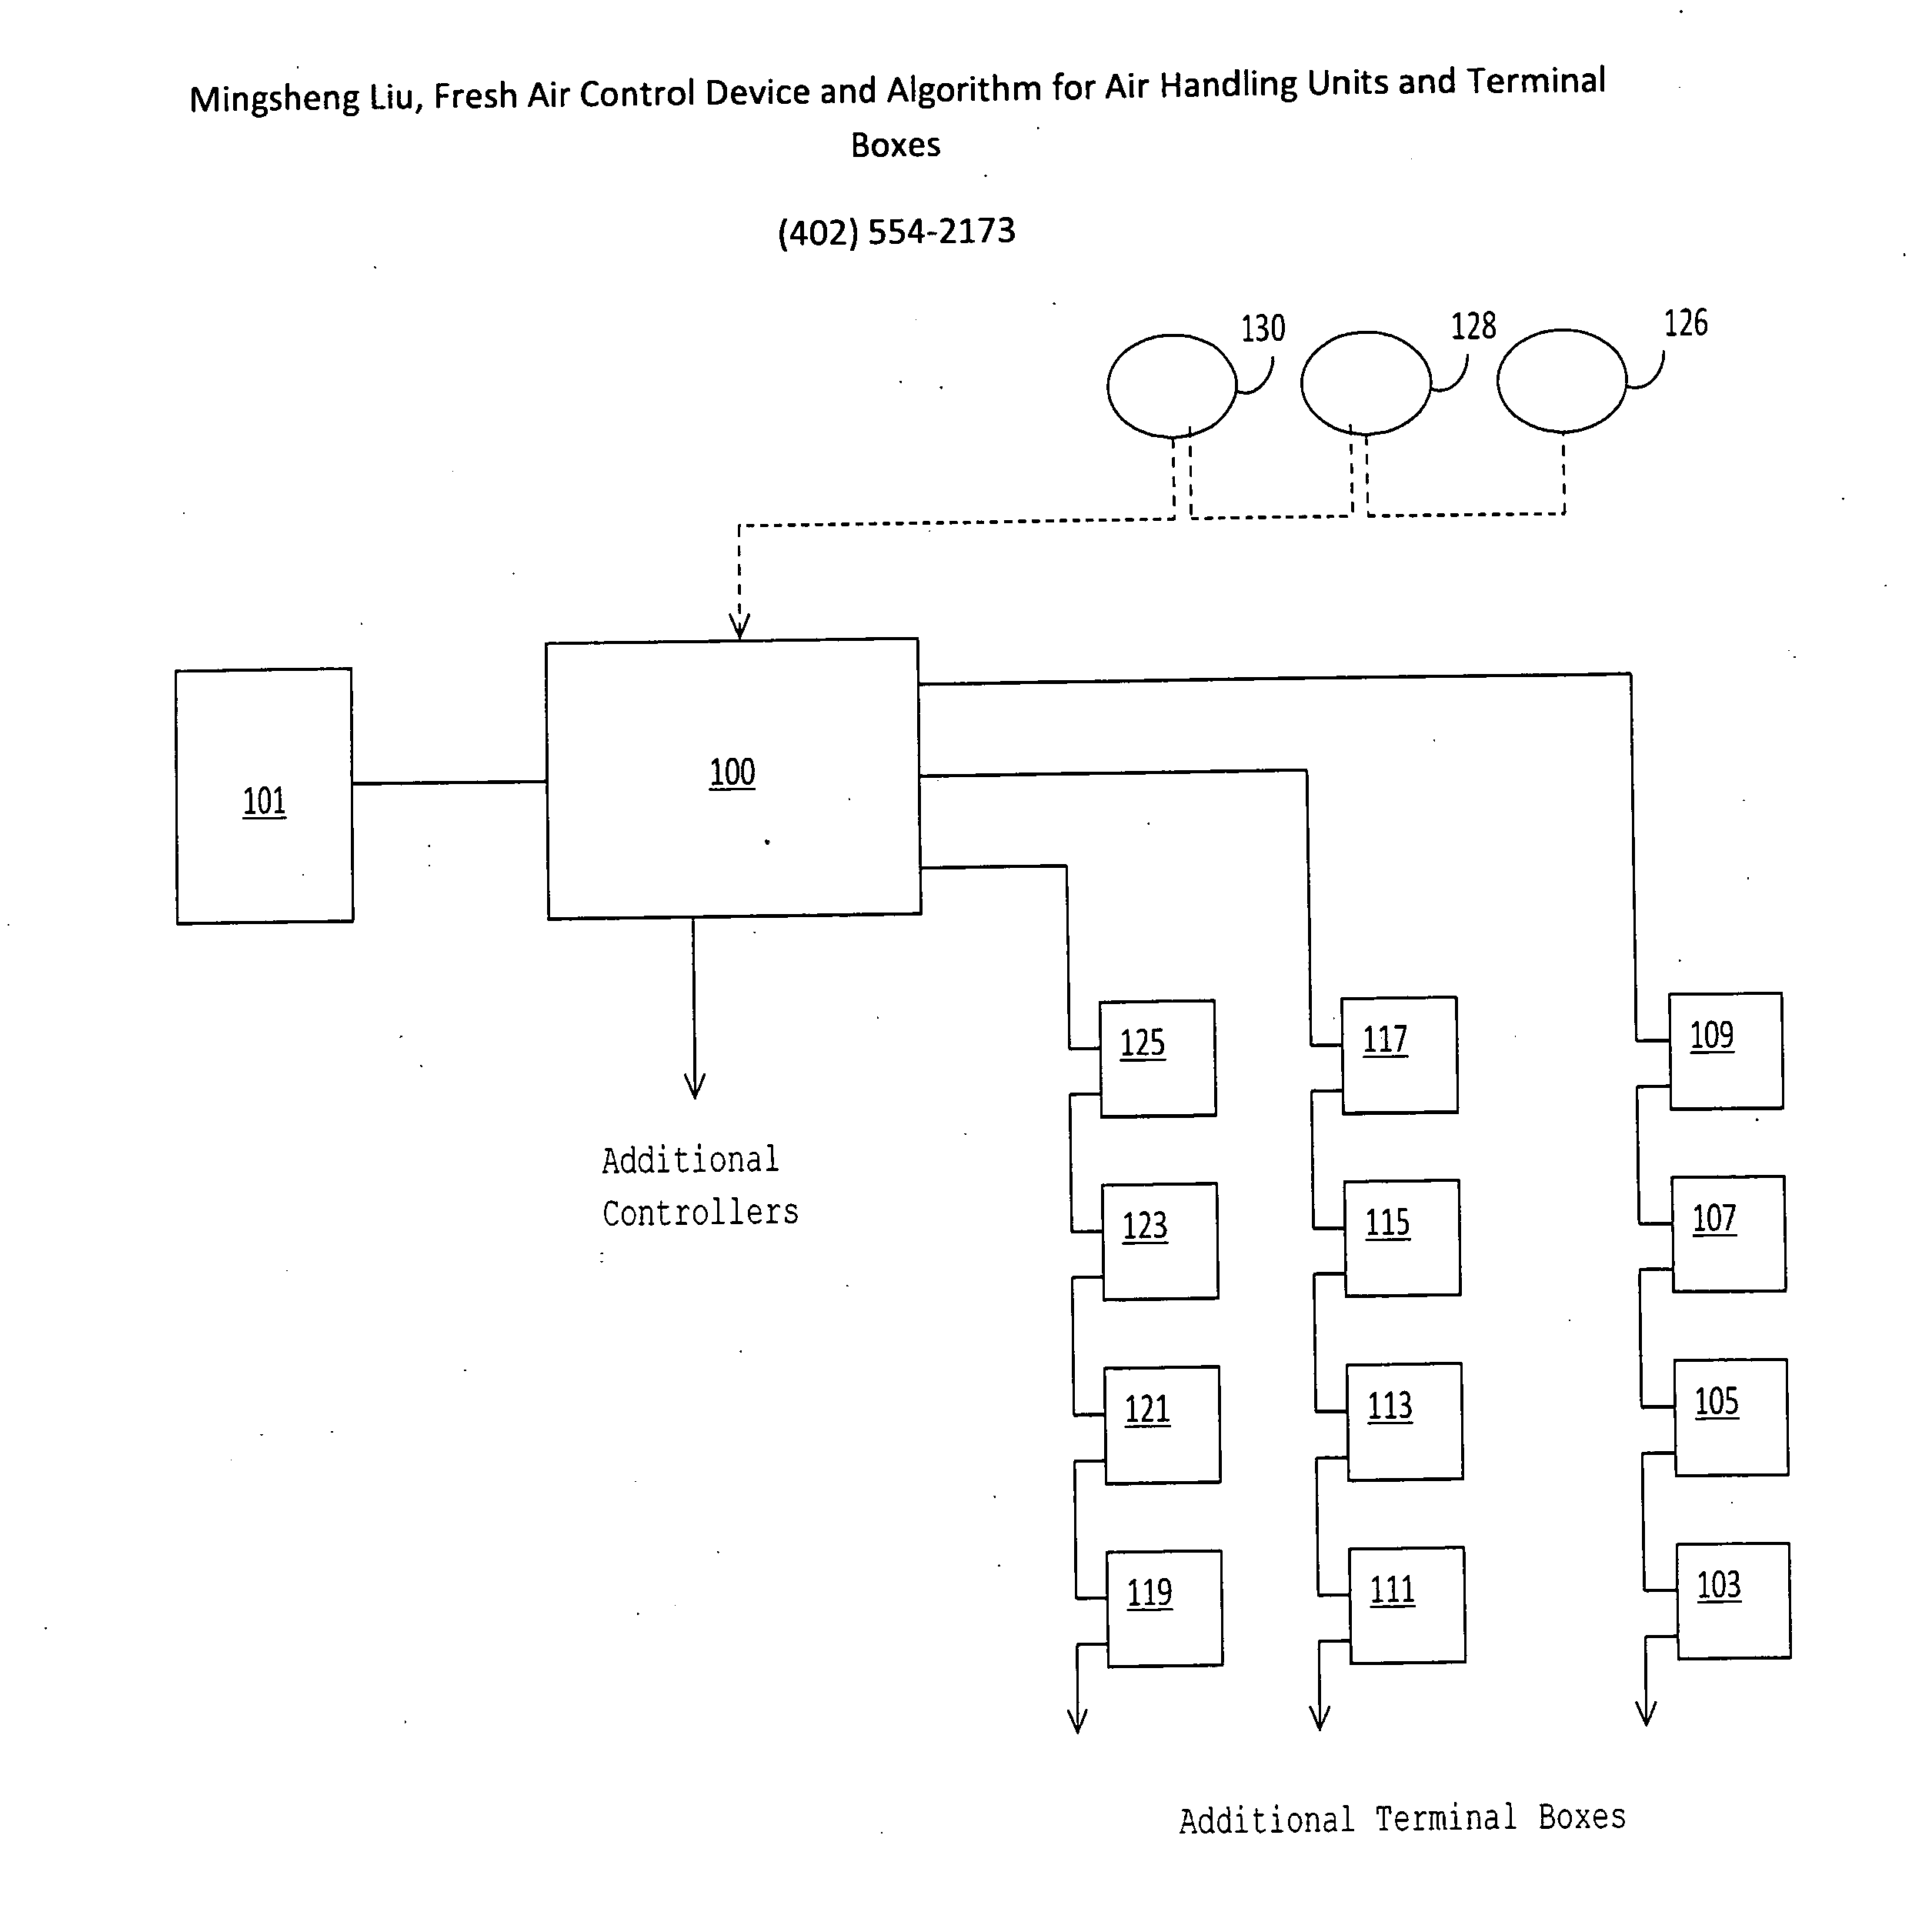 Fresh air control device and algorithm for air handling units and terminal boxes